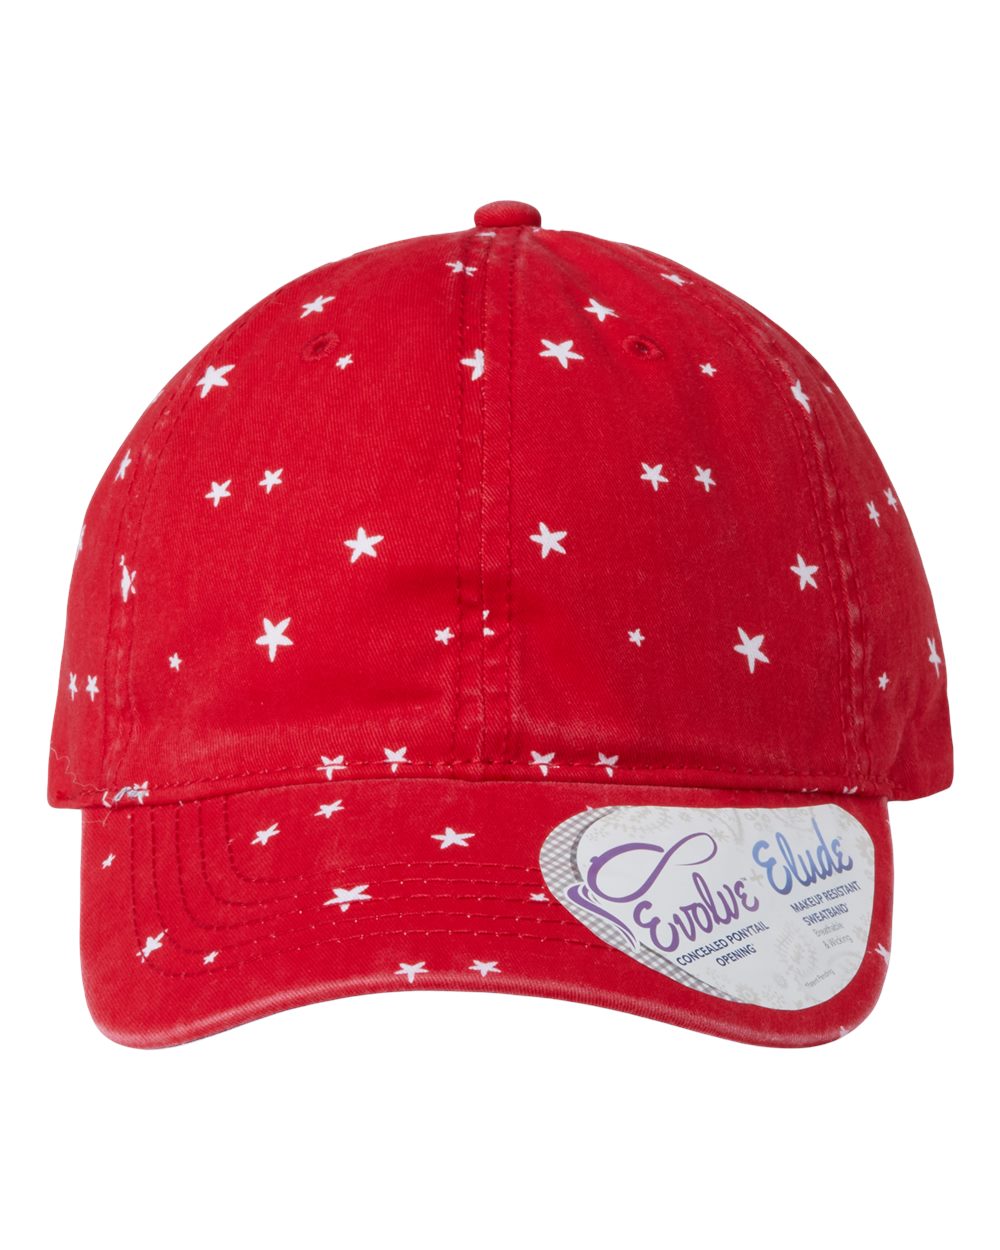 A women's garment-washed fashion print cap in red with white stars.